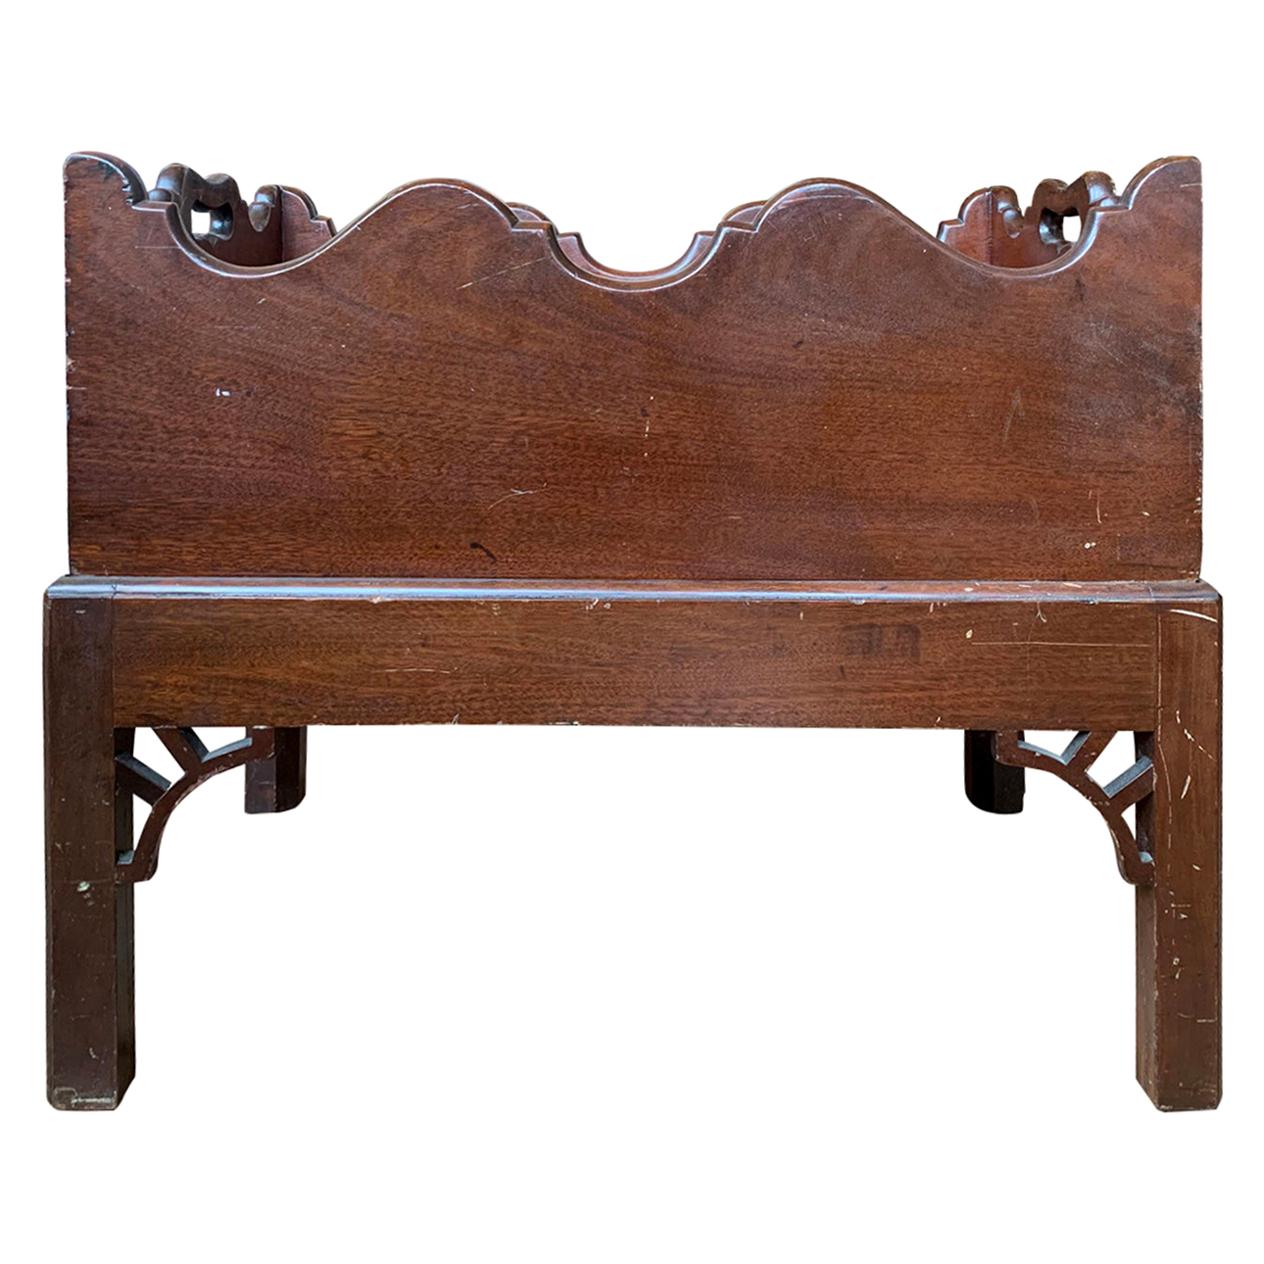 19th-20th Century Mahogany Cellarette or Bottle Carrier on Stand For Sale